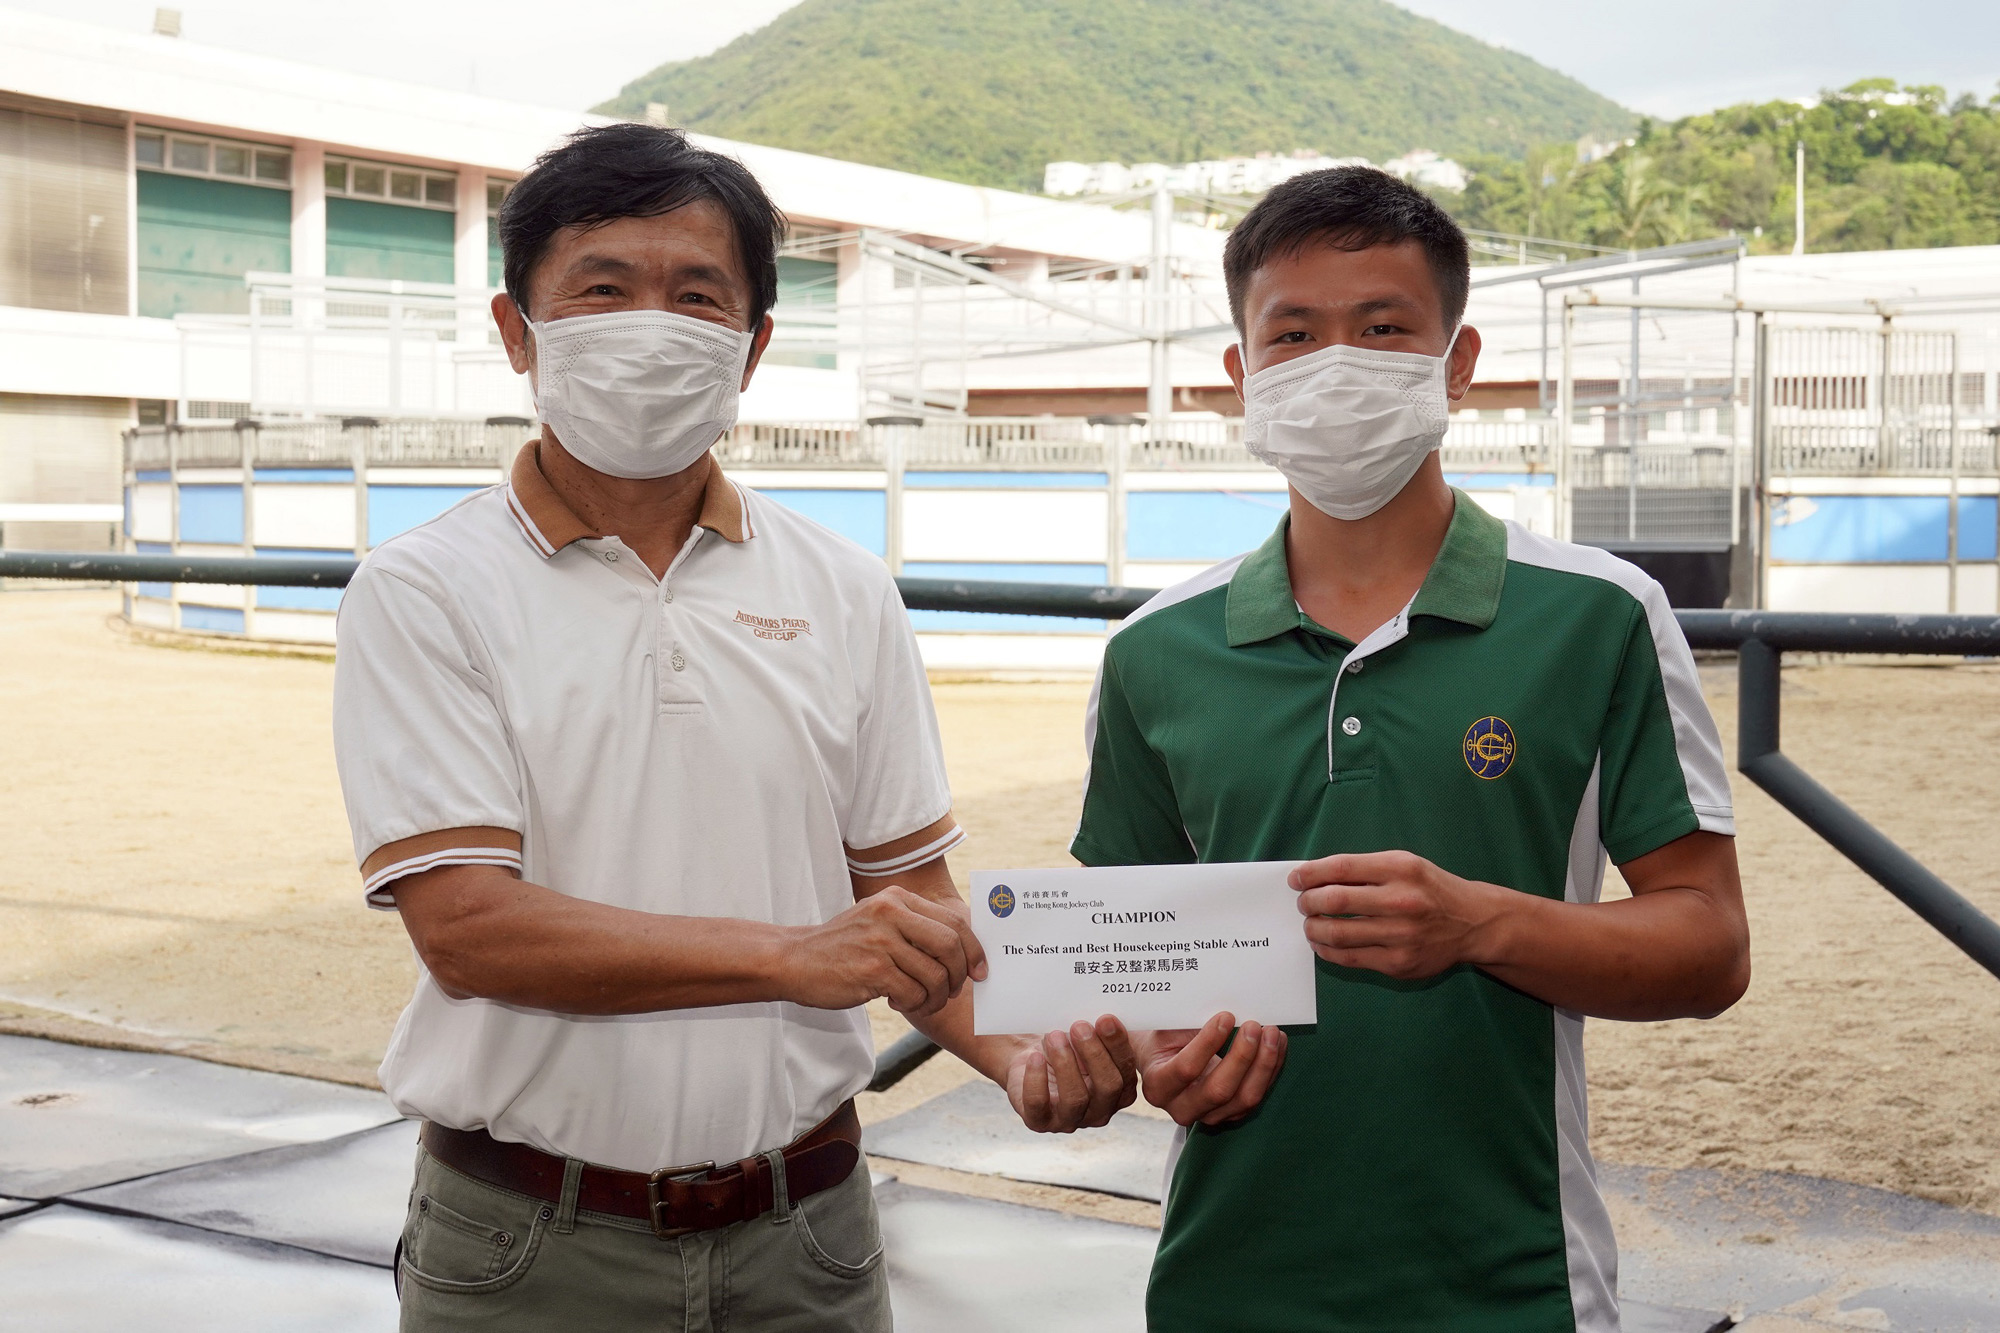 Samson Lau (left), Training Manager/Safety Manager, Racing Talent Training Centre, presents the stable prize to Wong Pui Kan (right), Work Rider of the Caspar Fownes stable.